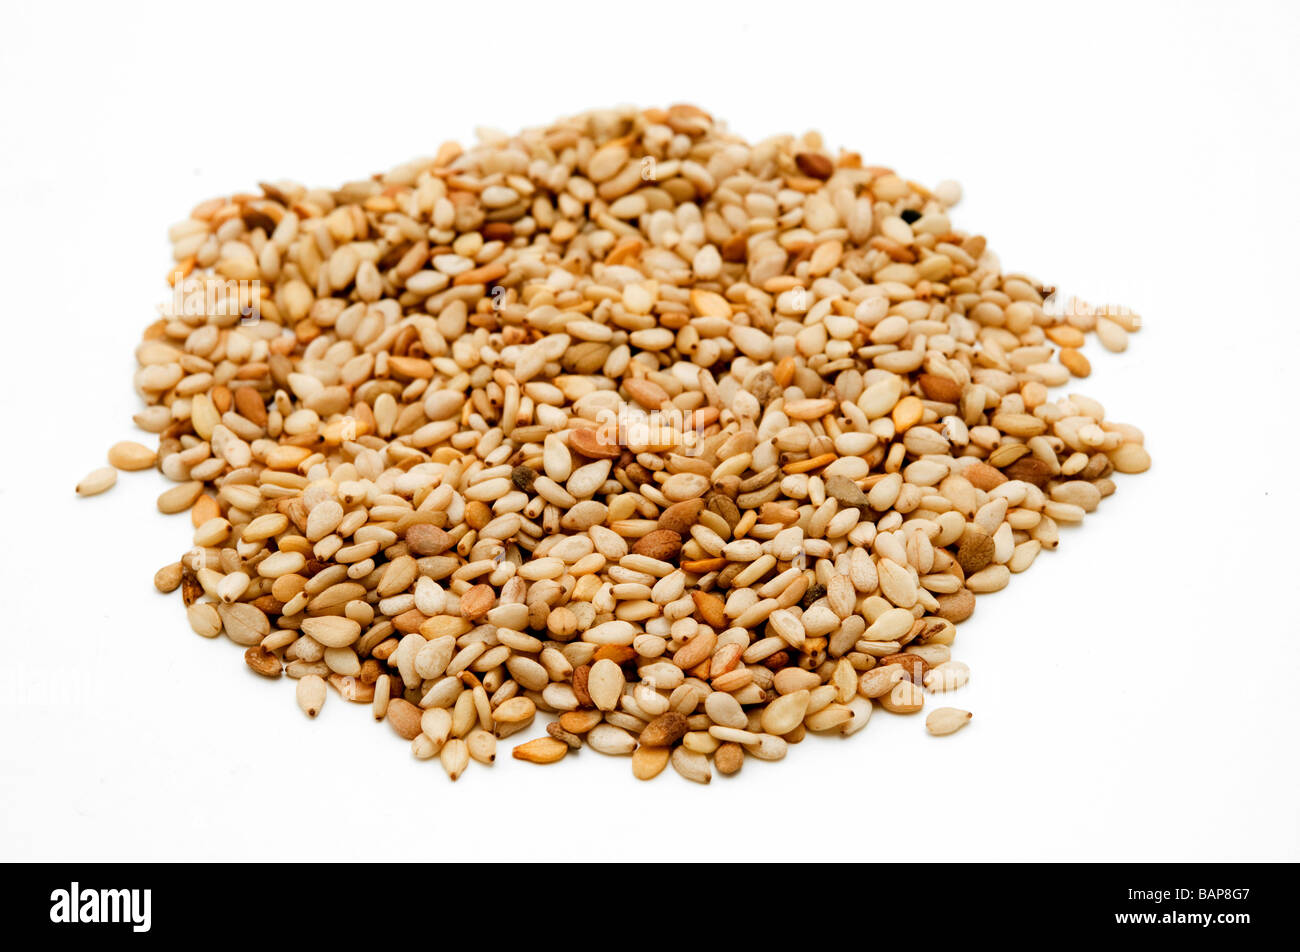 Sesame seeds on a white background Stock Photo